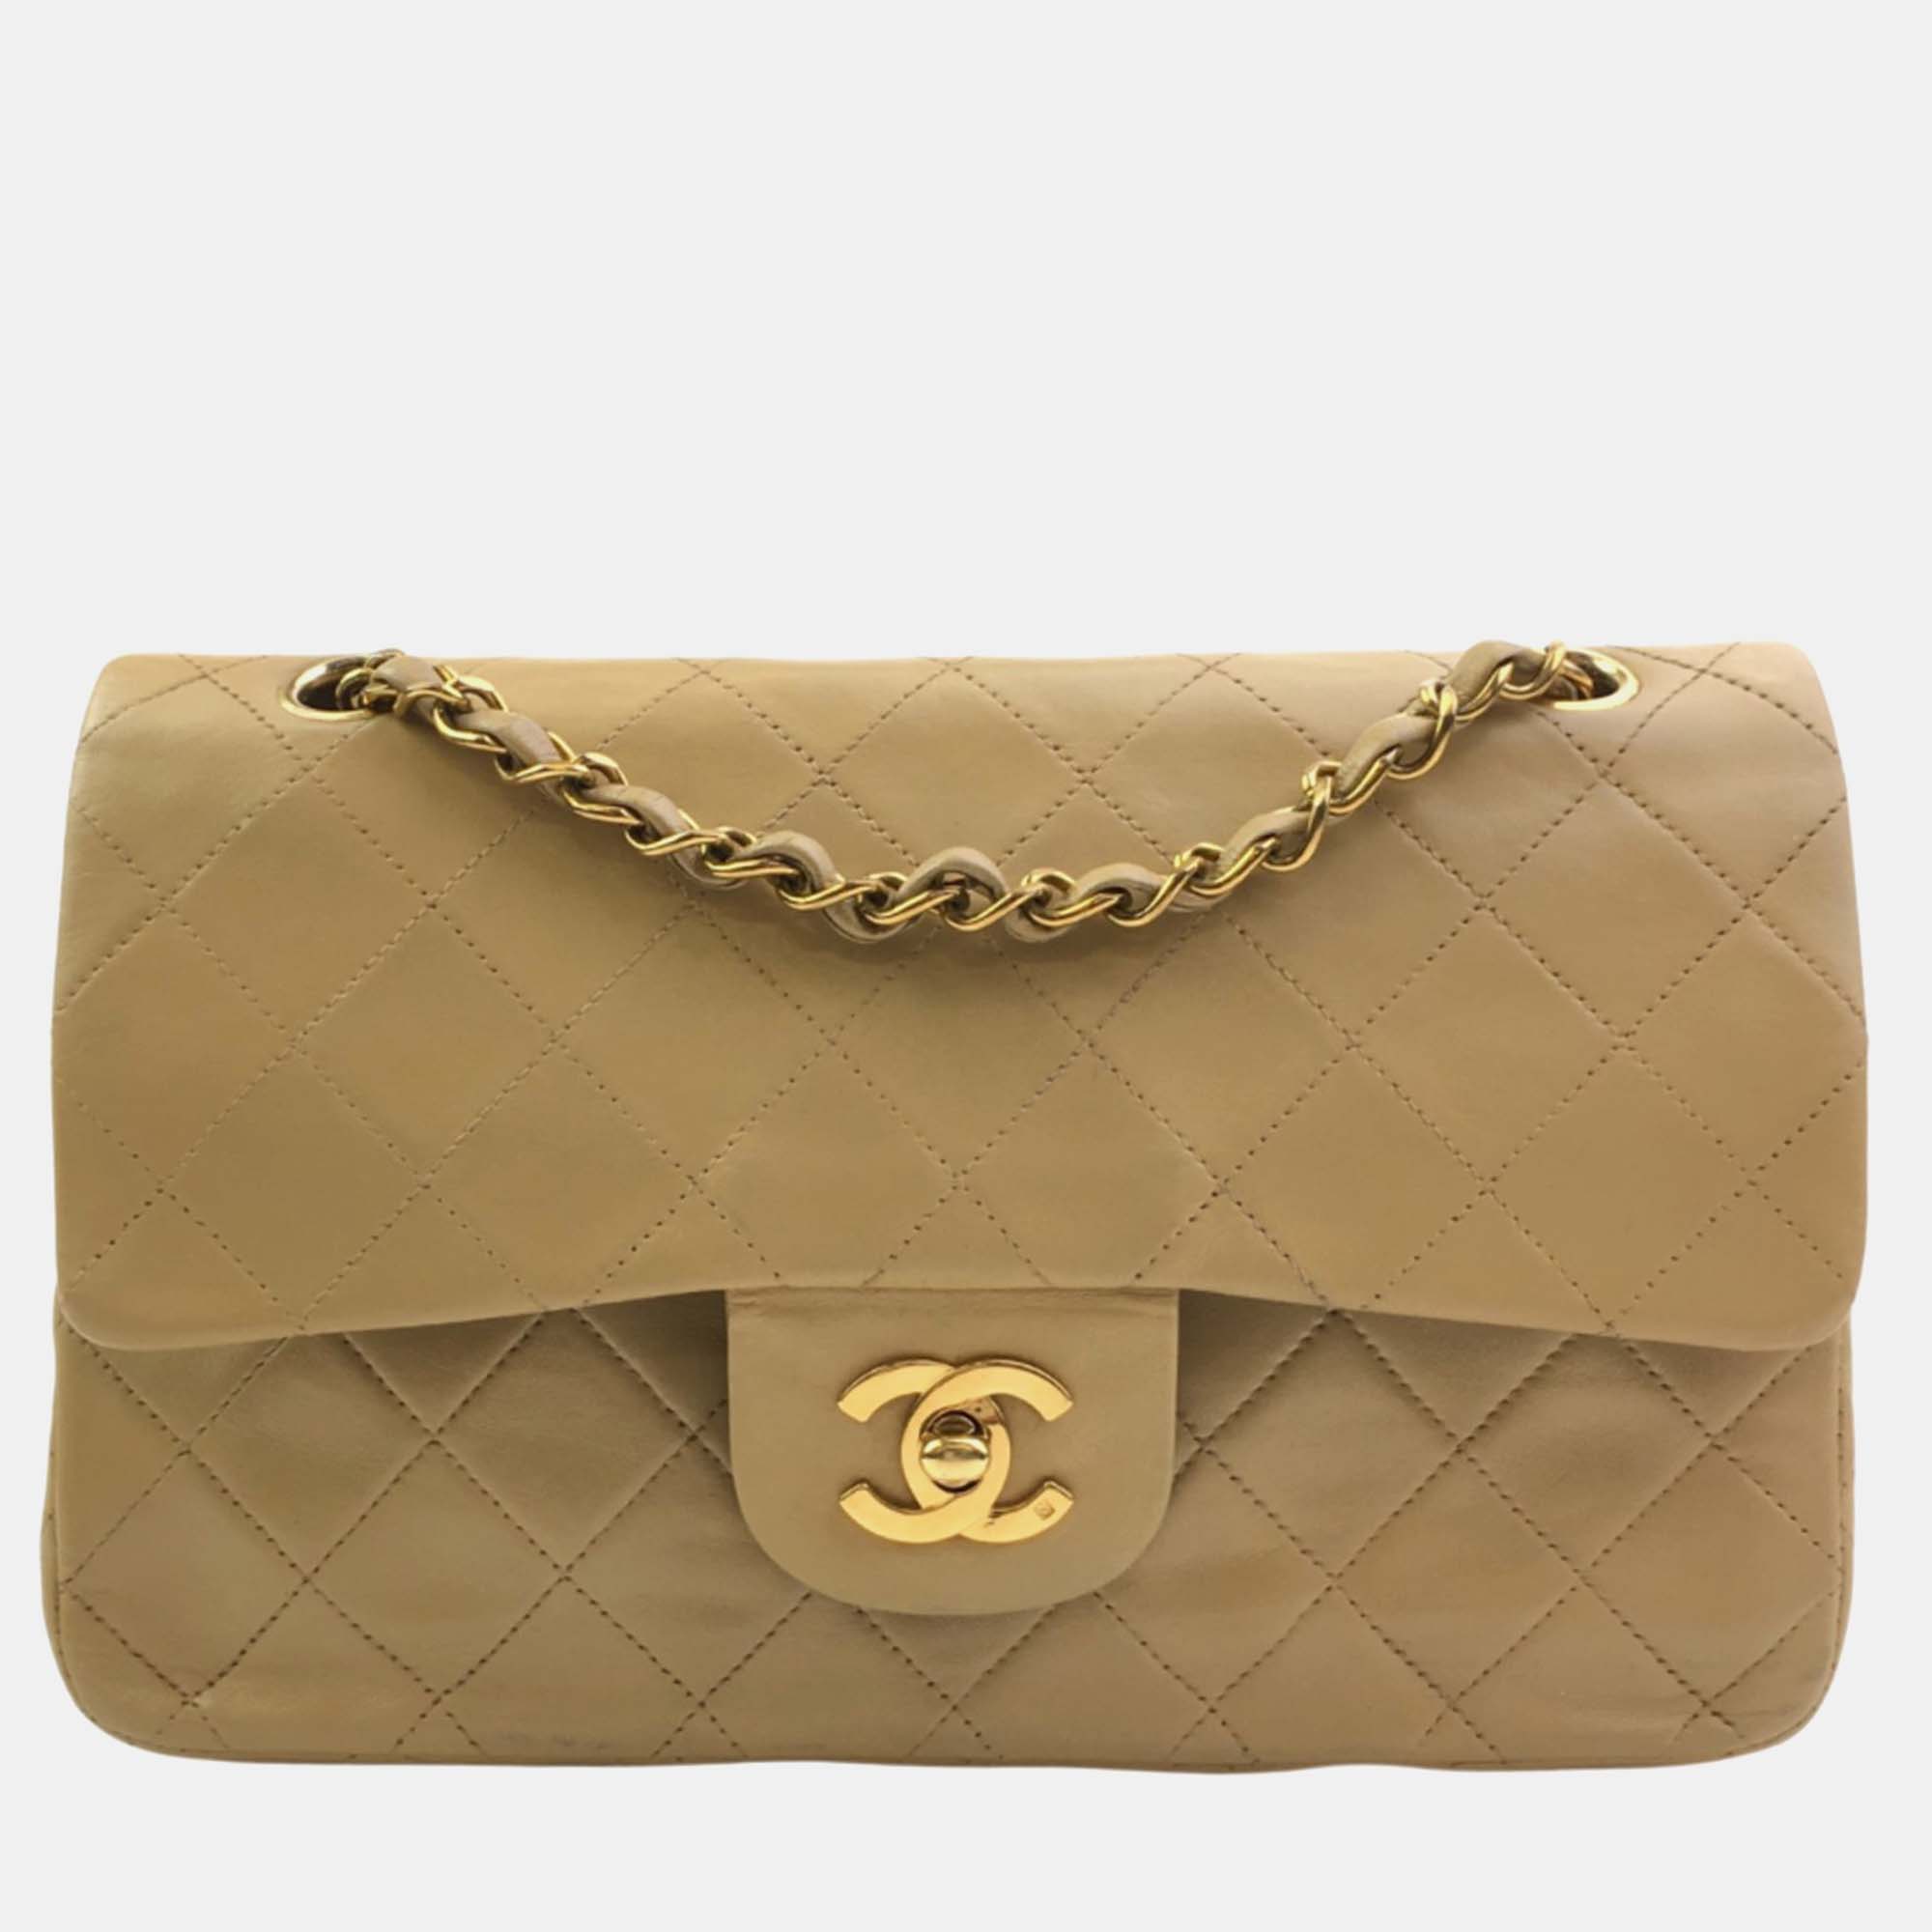 Chanel beige lambskin leather small vintage classic double flap shoulder bags